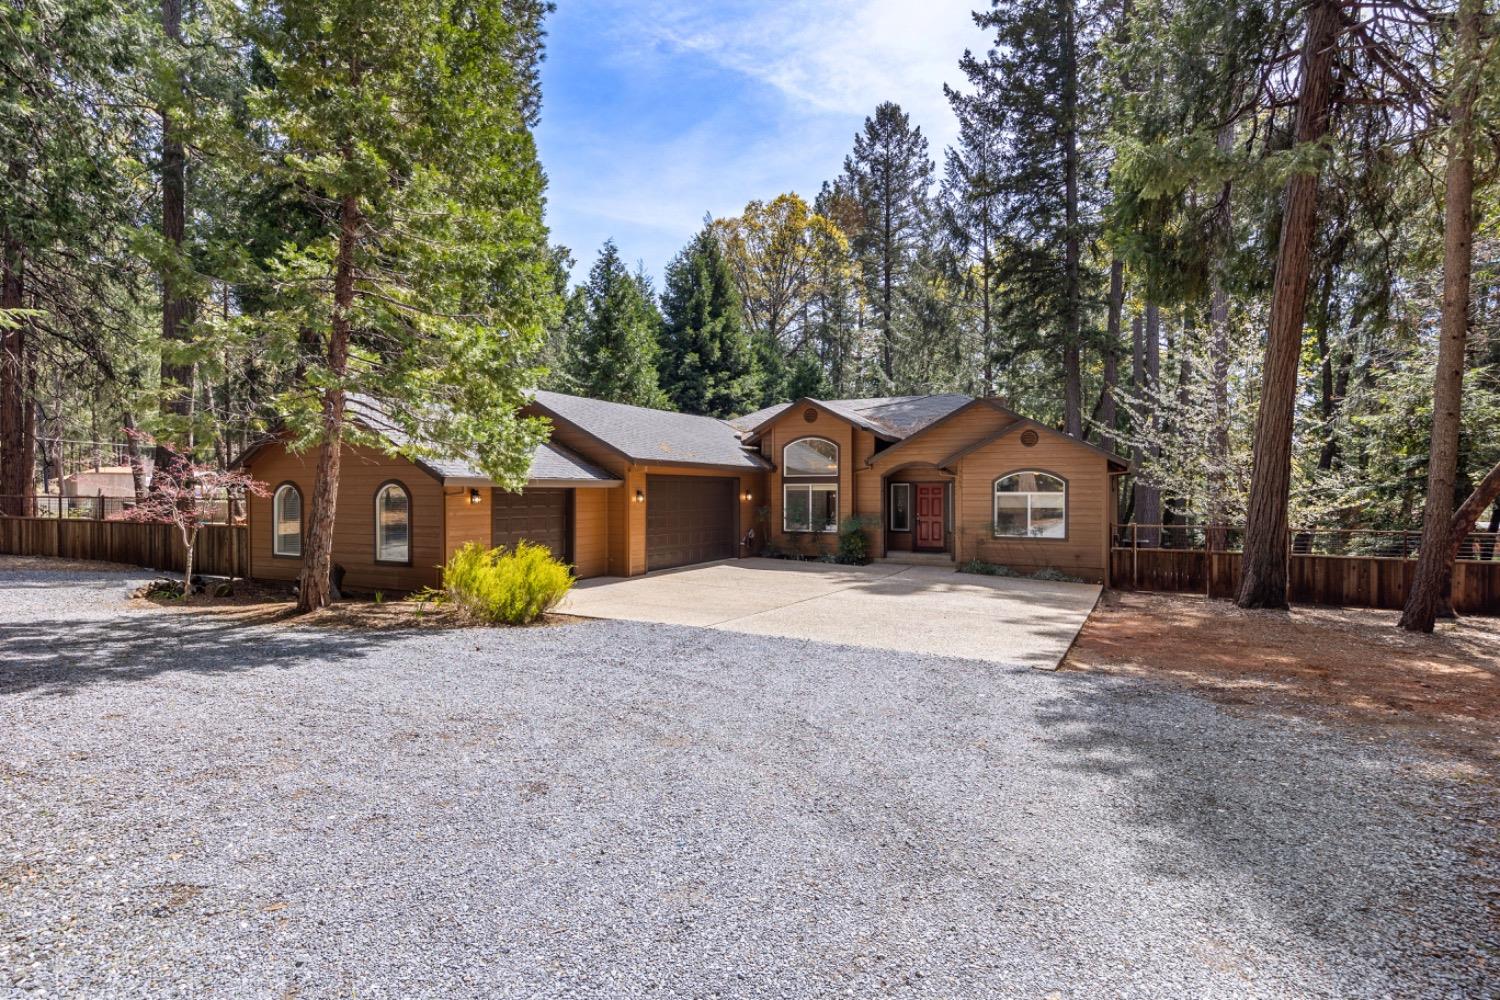 Photo of 5565 Happy Pines Dr in Foresthill, CA